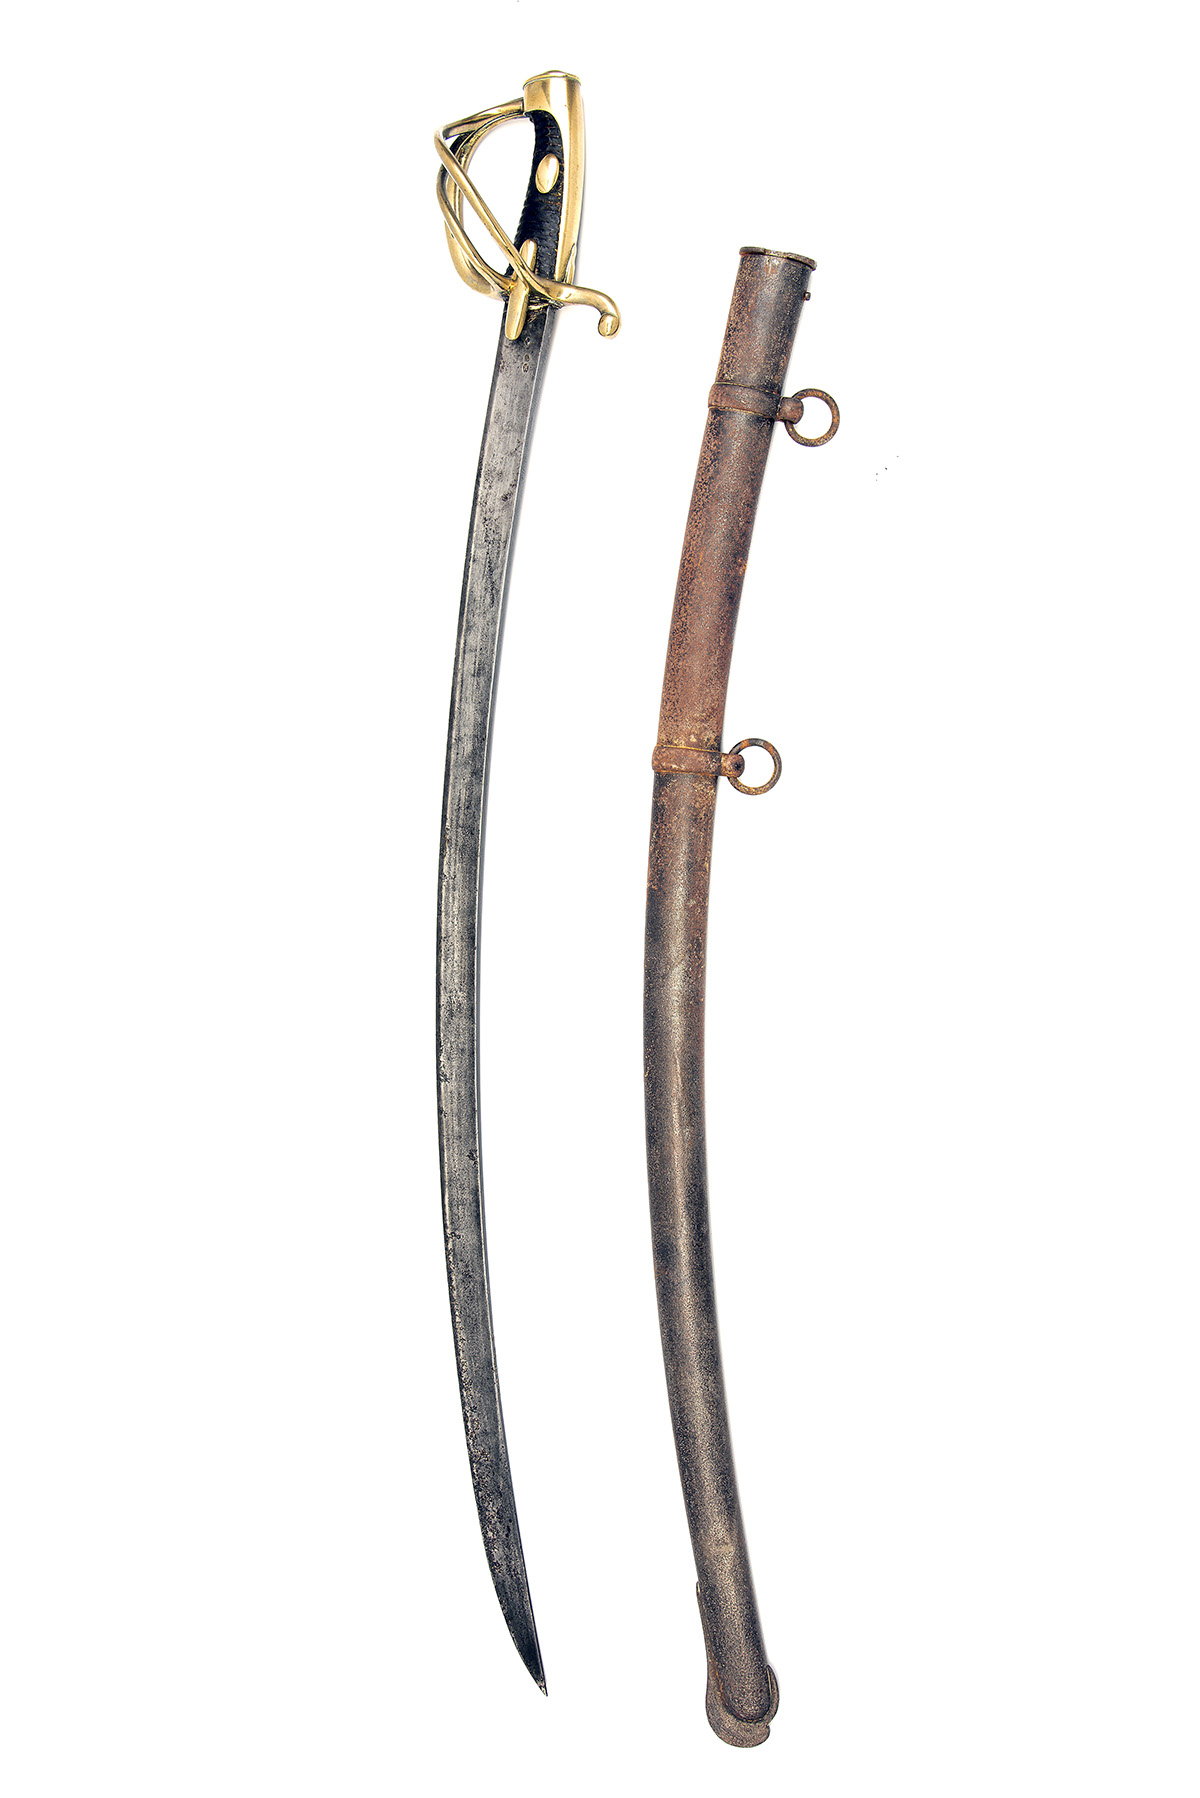 A NAPOLEONIC-ERA FRENCH HUSSAR TROOPER'S SWORD SIGNED KLINGENTHAL, no visible serial number, dated